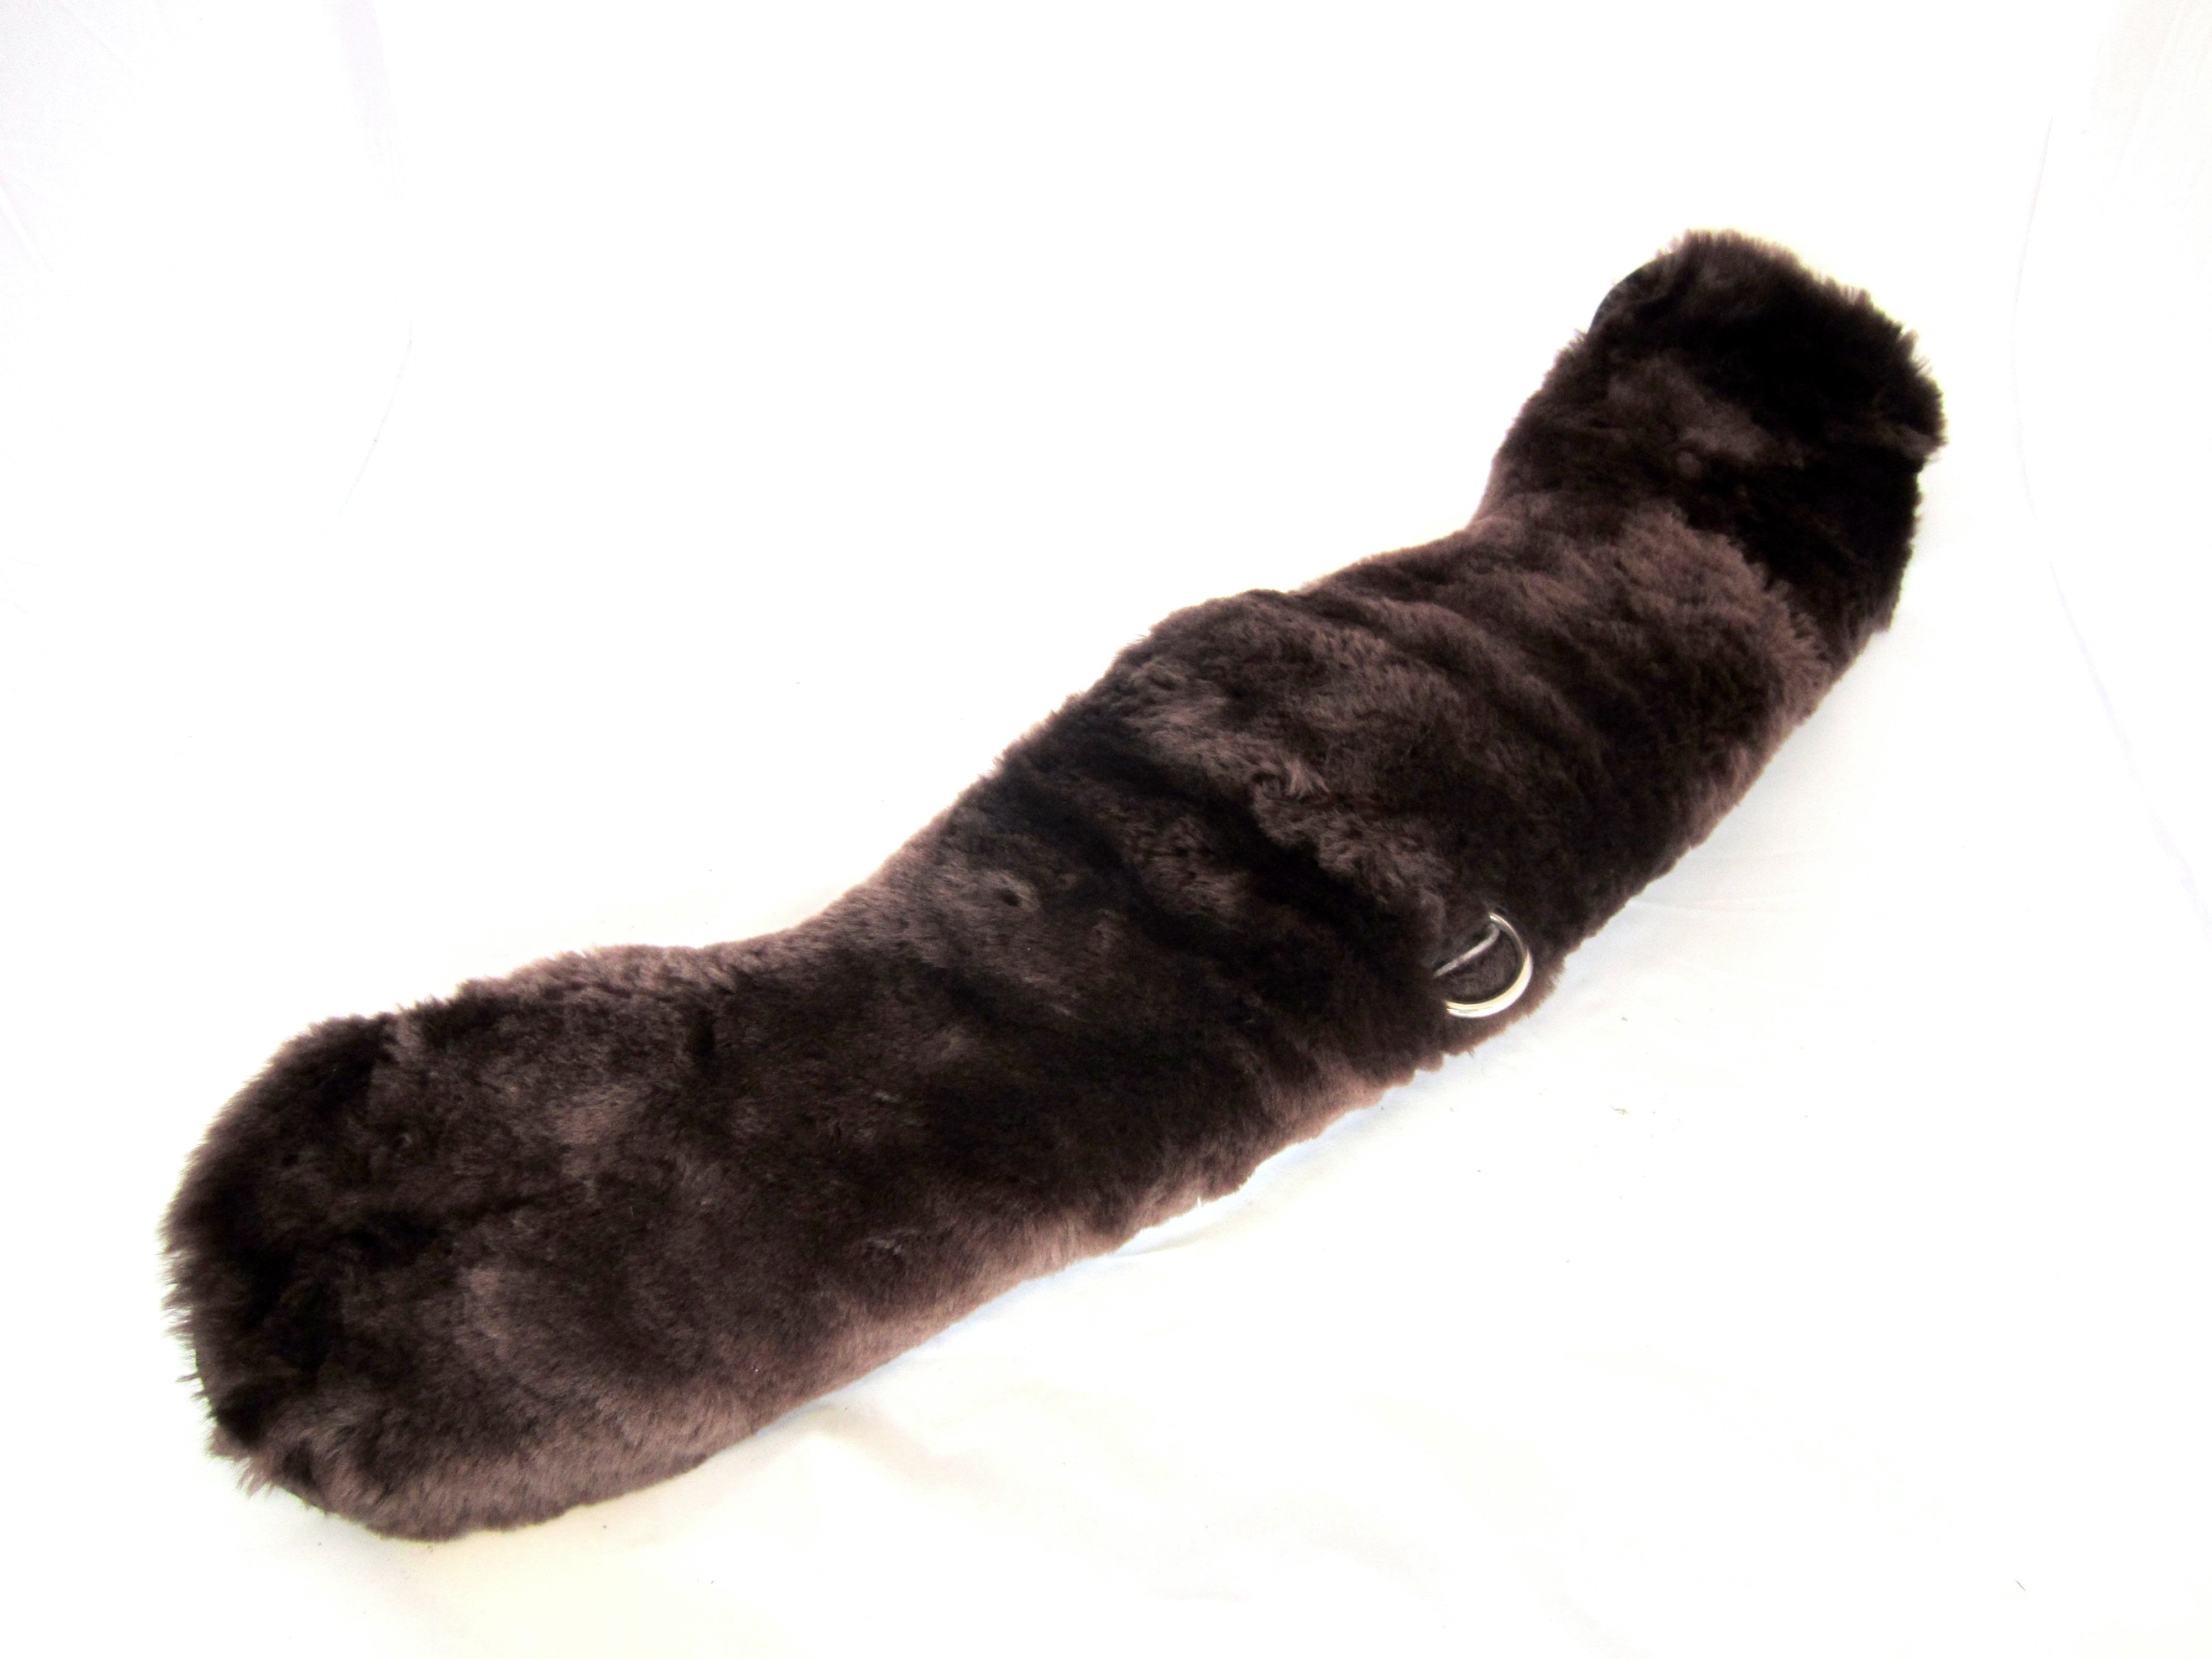 B-ITEM ON SALE - Soft western "moon girth" with lambskin - removable &amp; reinforced, saddle girth